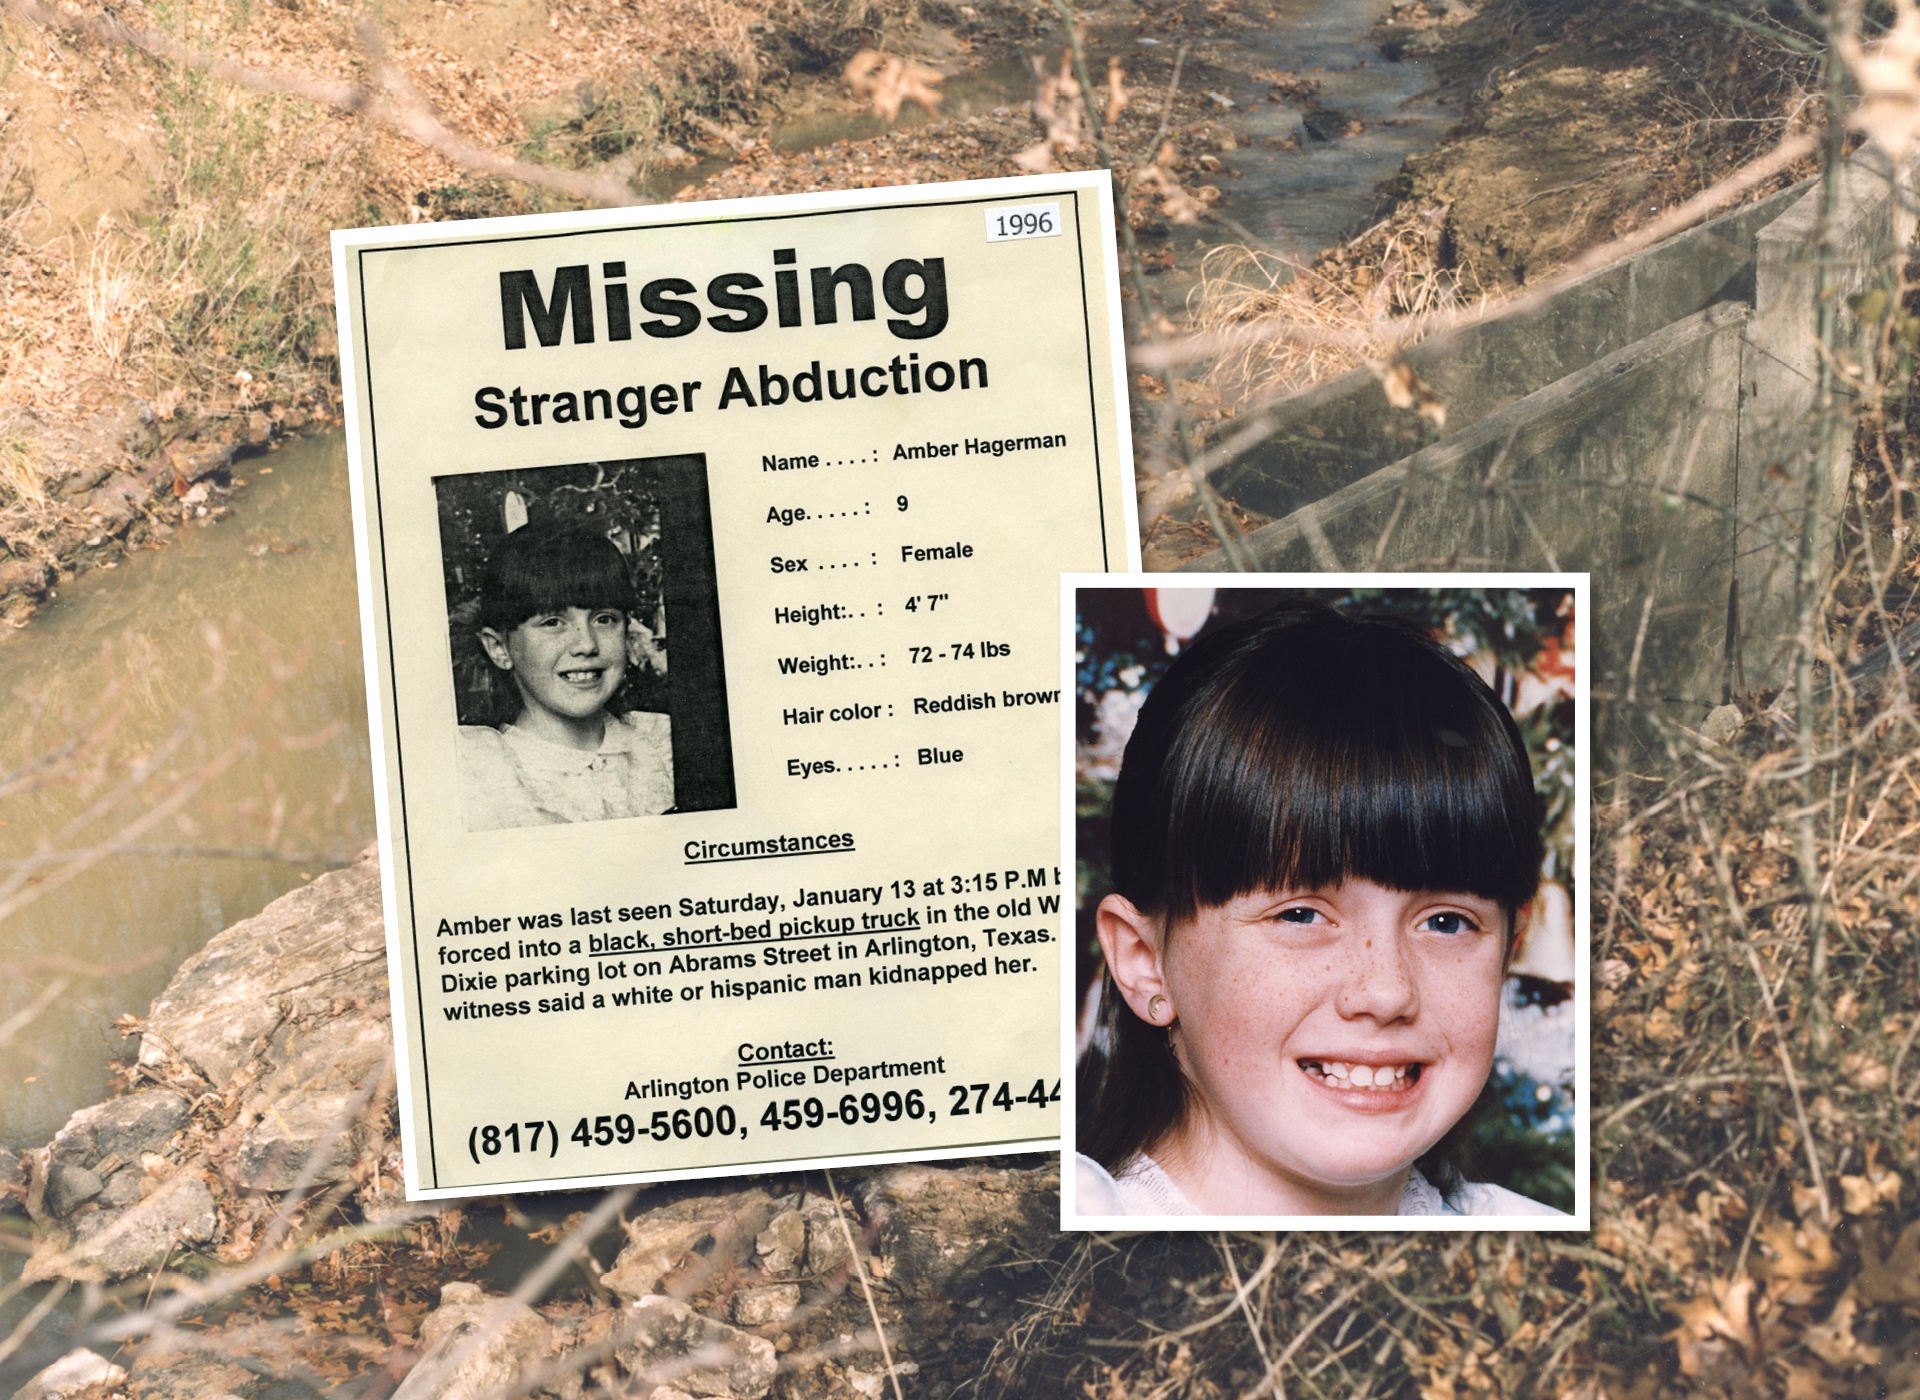 Amber's missing poster with creek in the background